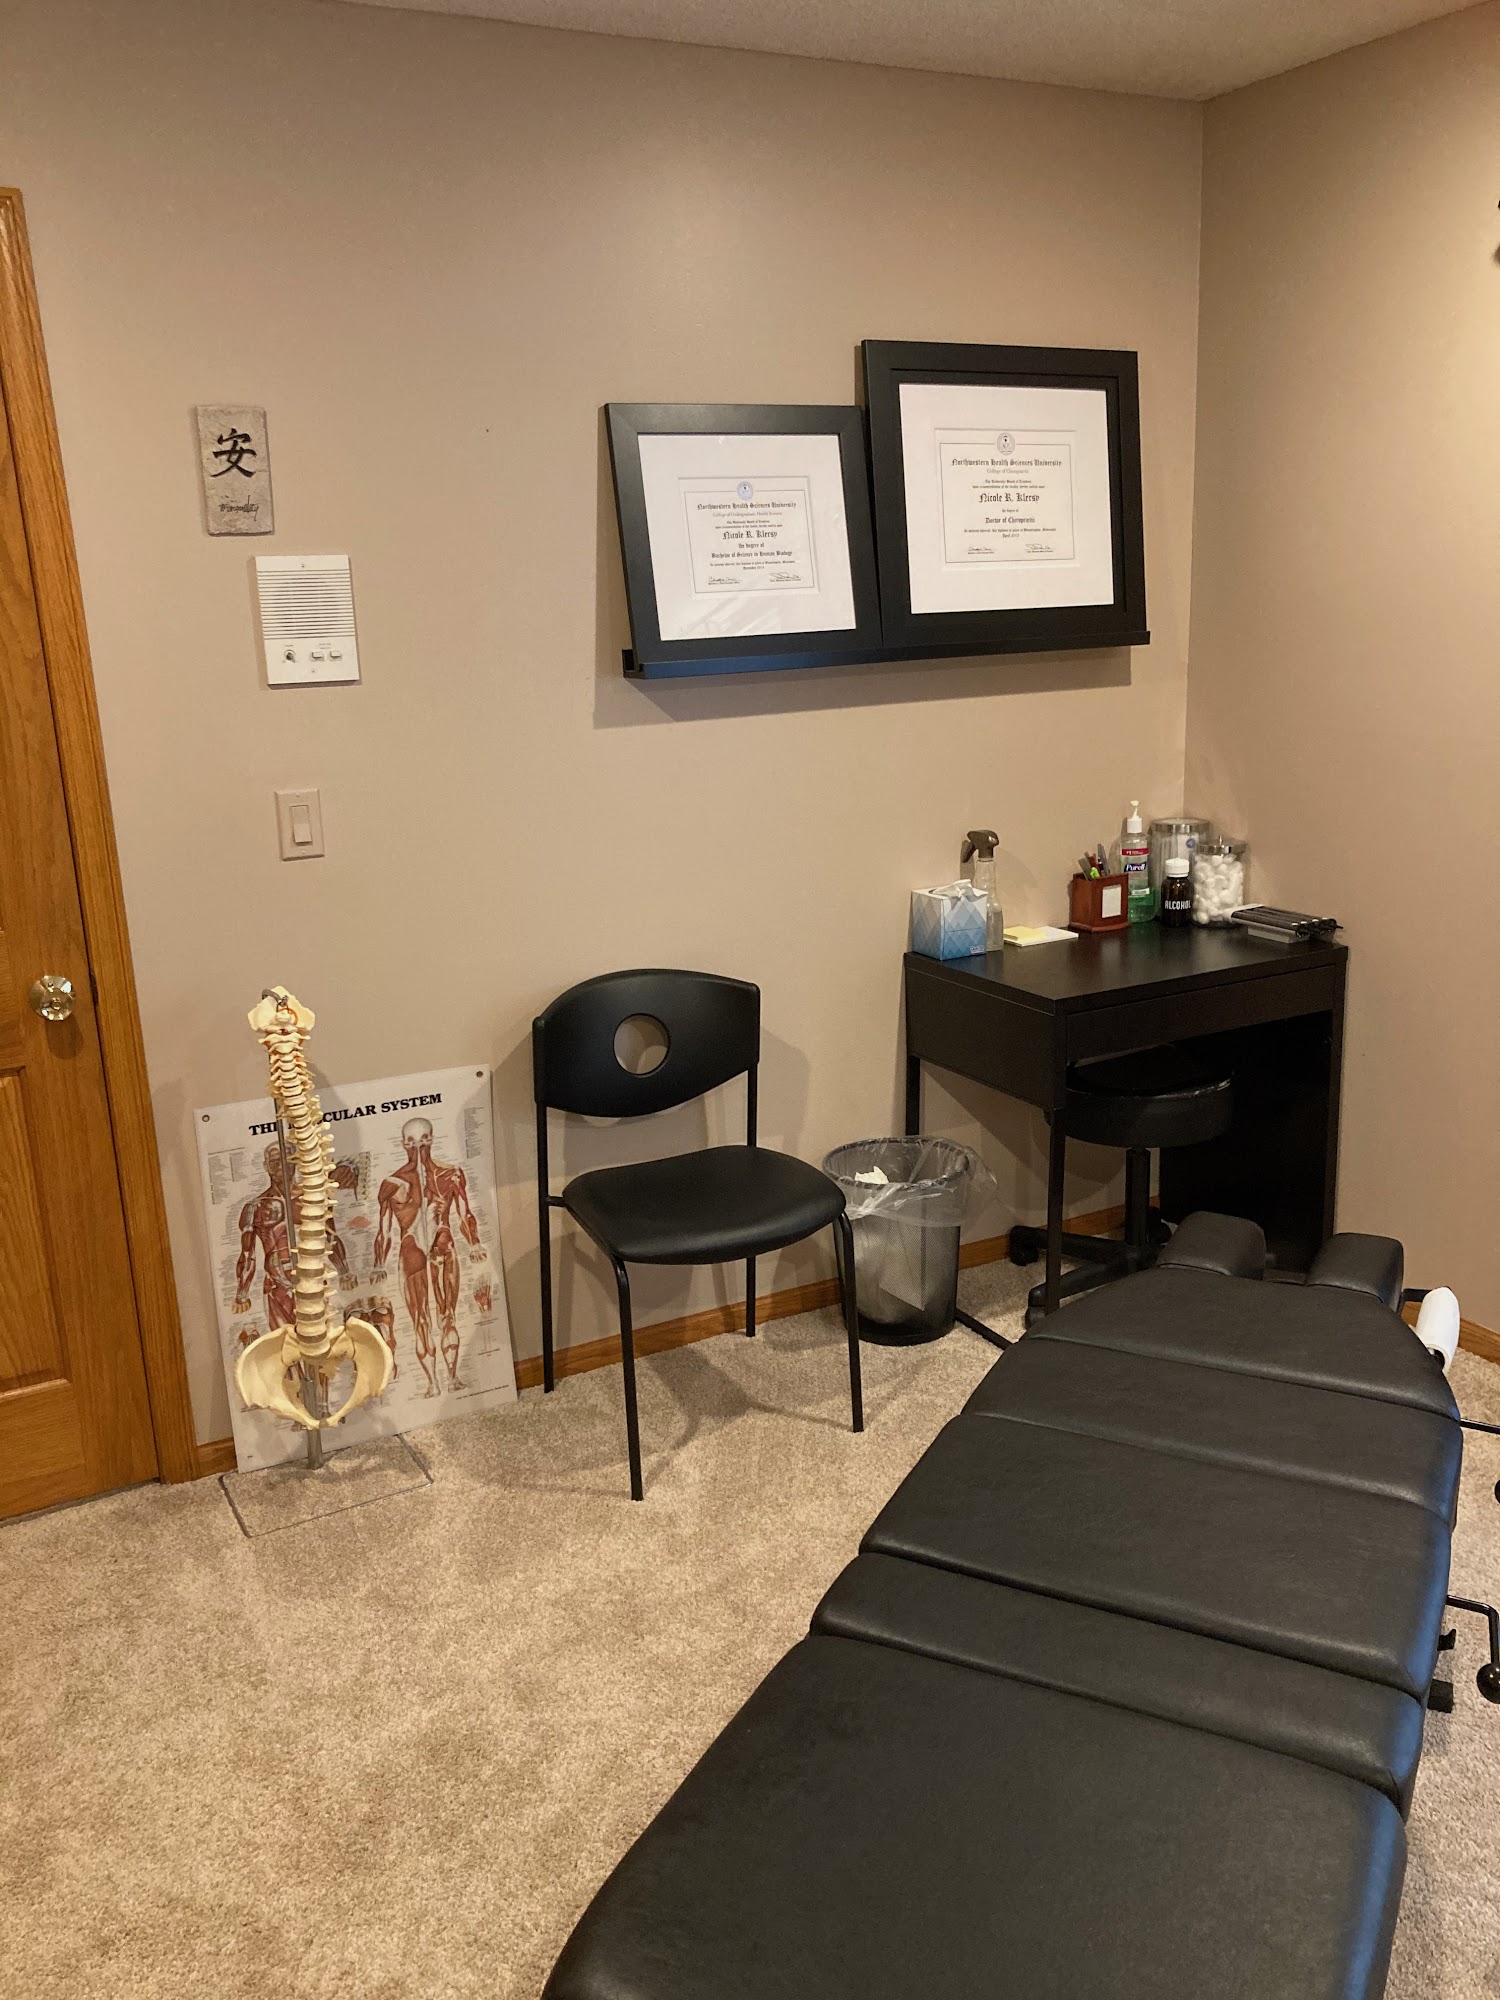 Perfect Touch Massage & Chiropractic | Functional Medicine Clinic 6278 Otter Lake Rd, Lino Lakes Minnesota 55110